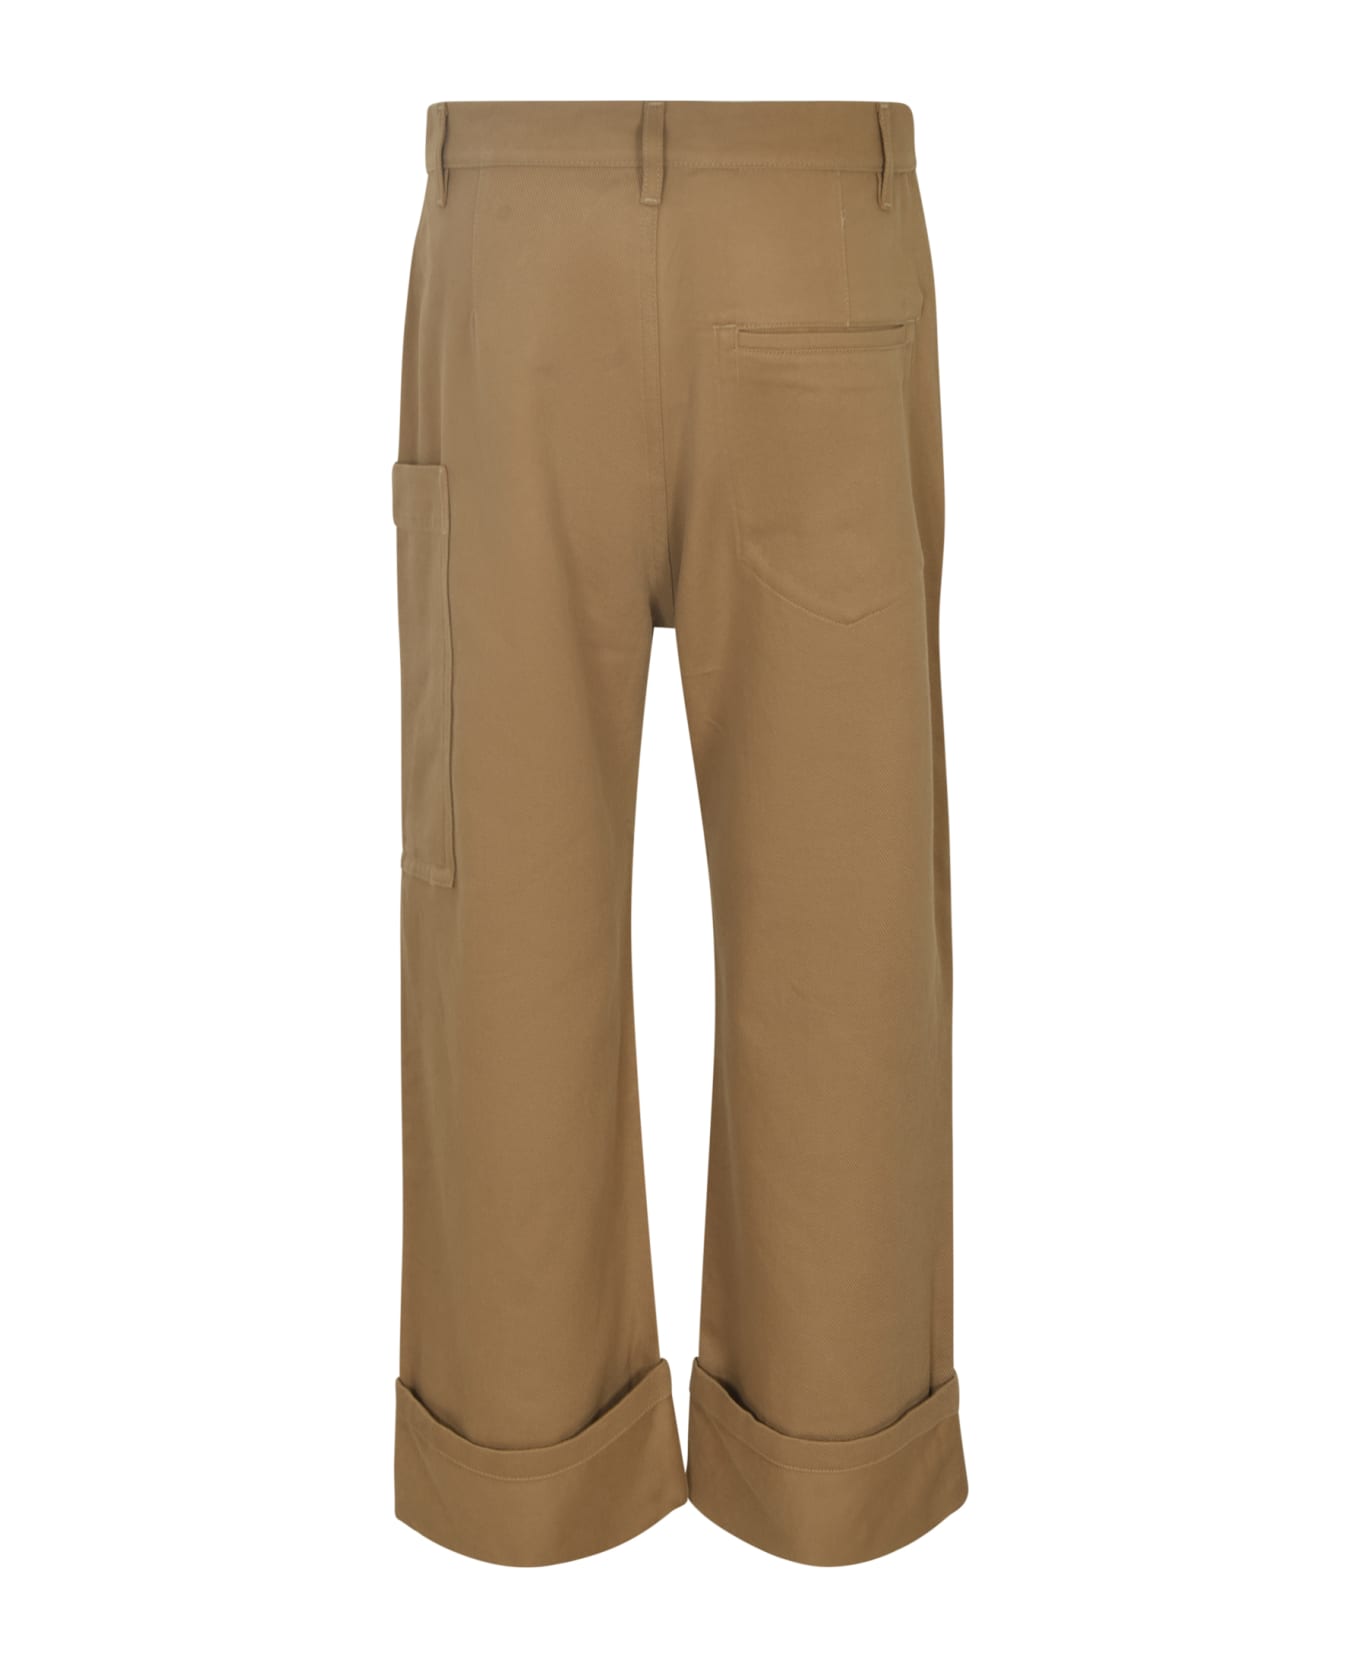 Sofie d'Hoore Straight Buttoned Trousers - Cardboard